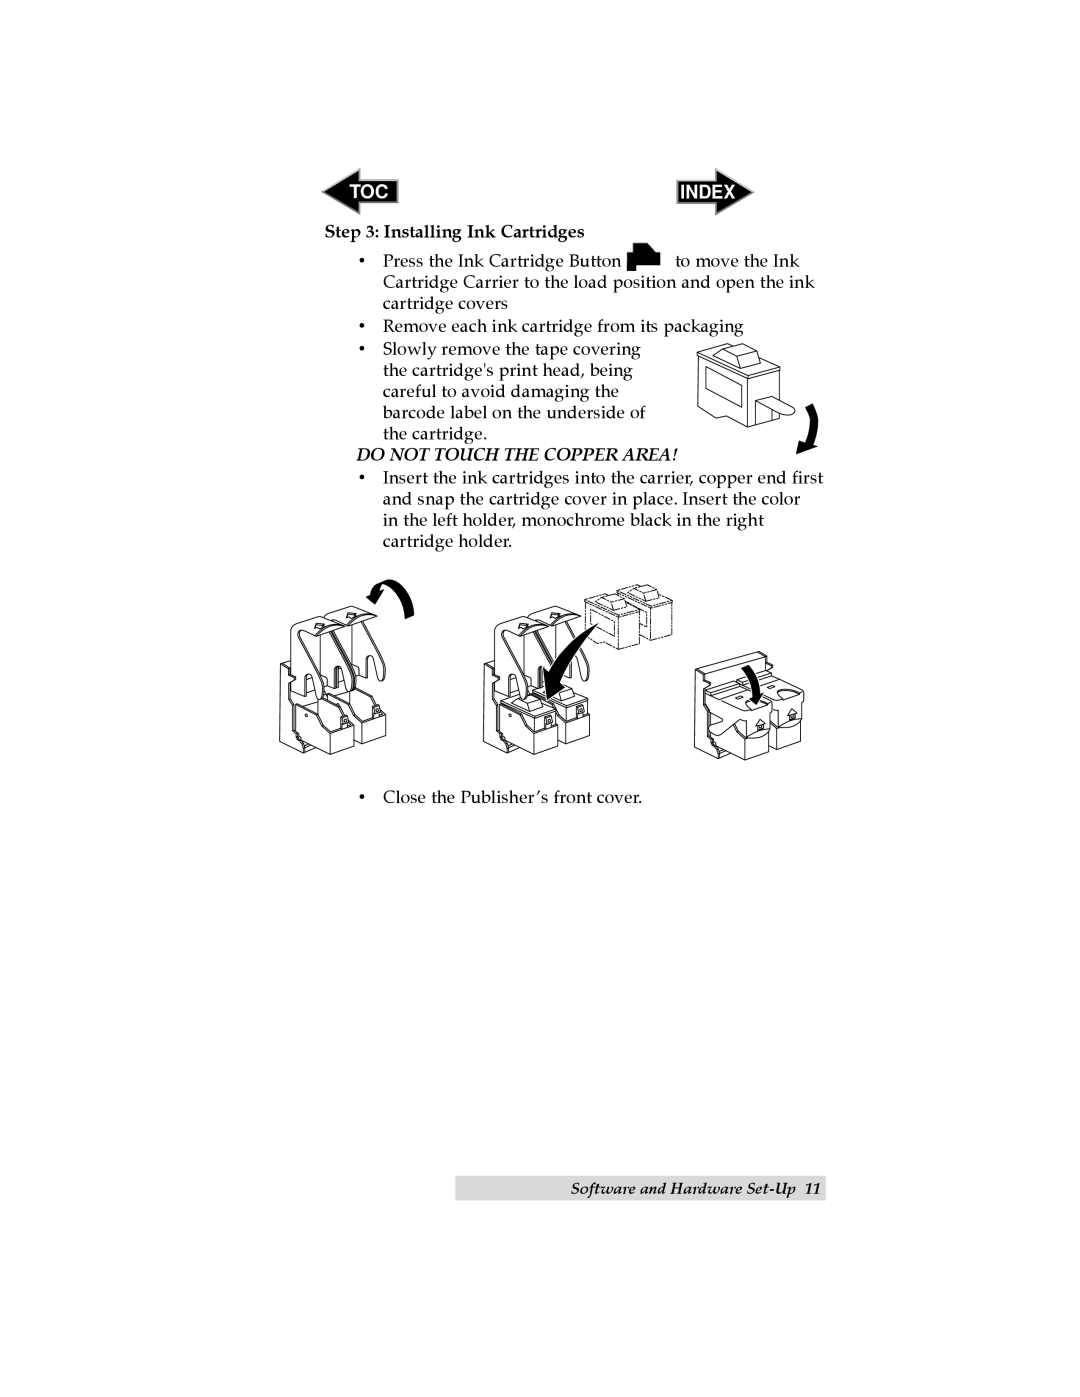 Primera Technology BravoTM user manual Toc Index, Installing Ink Cartridges, Do Not Touch The Copper Area 